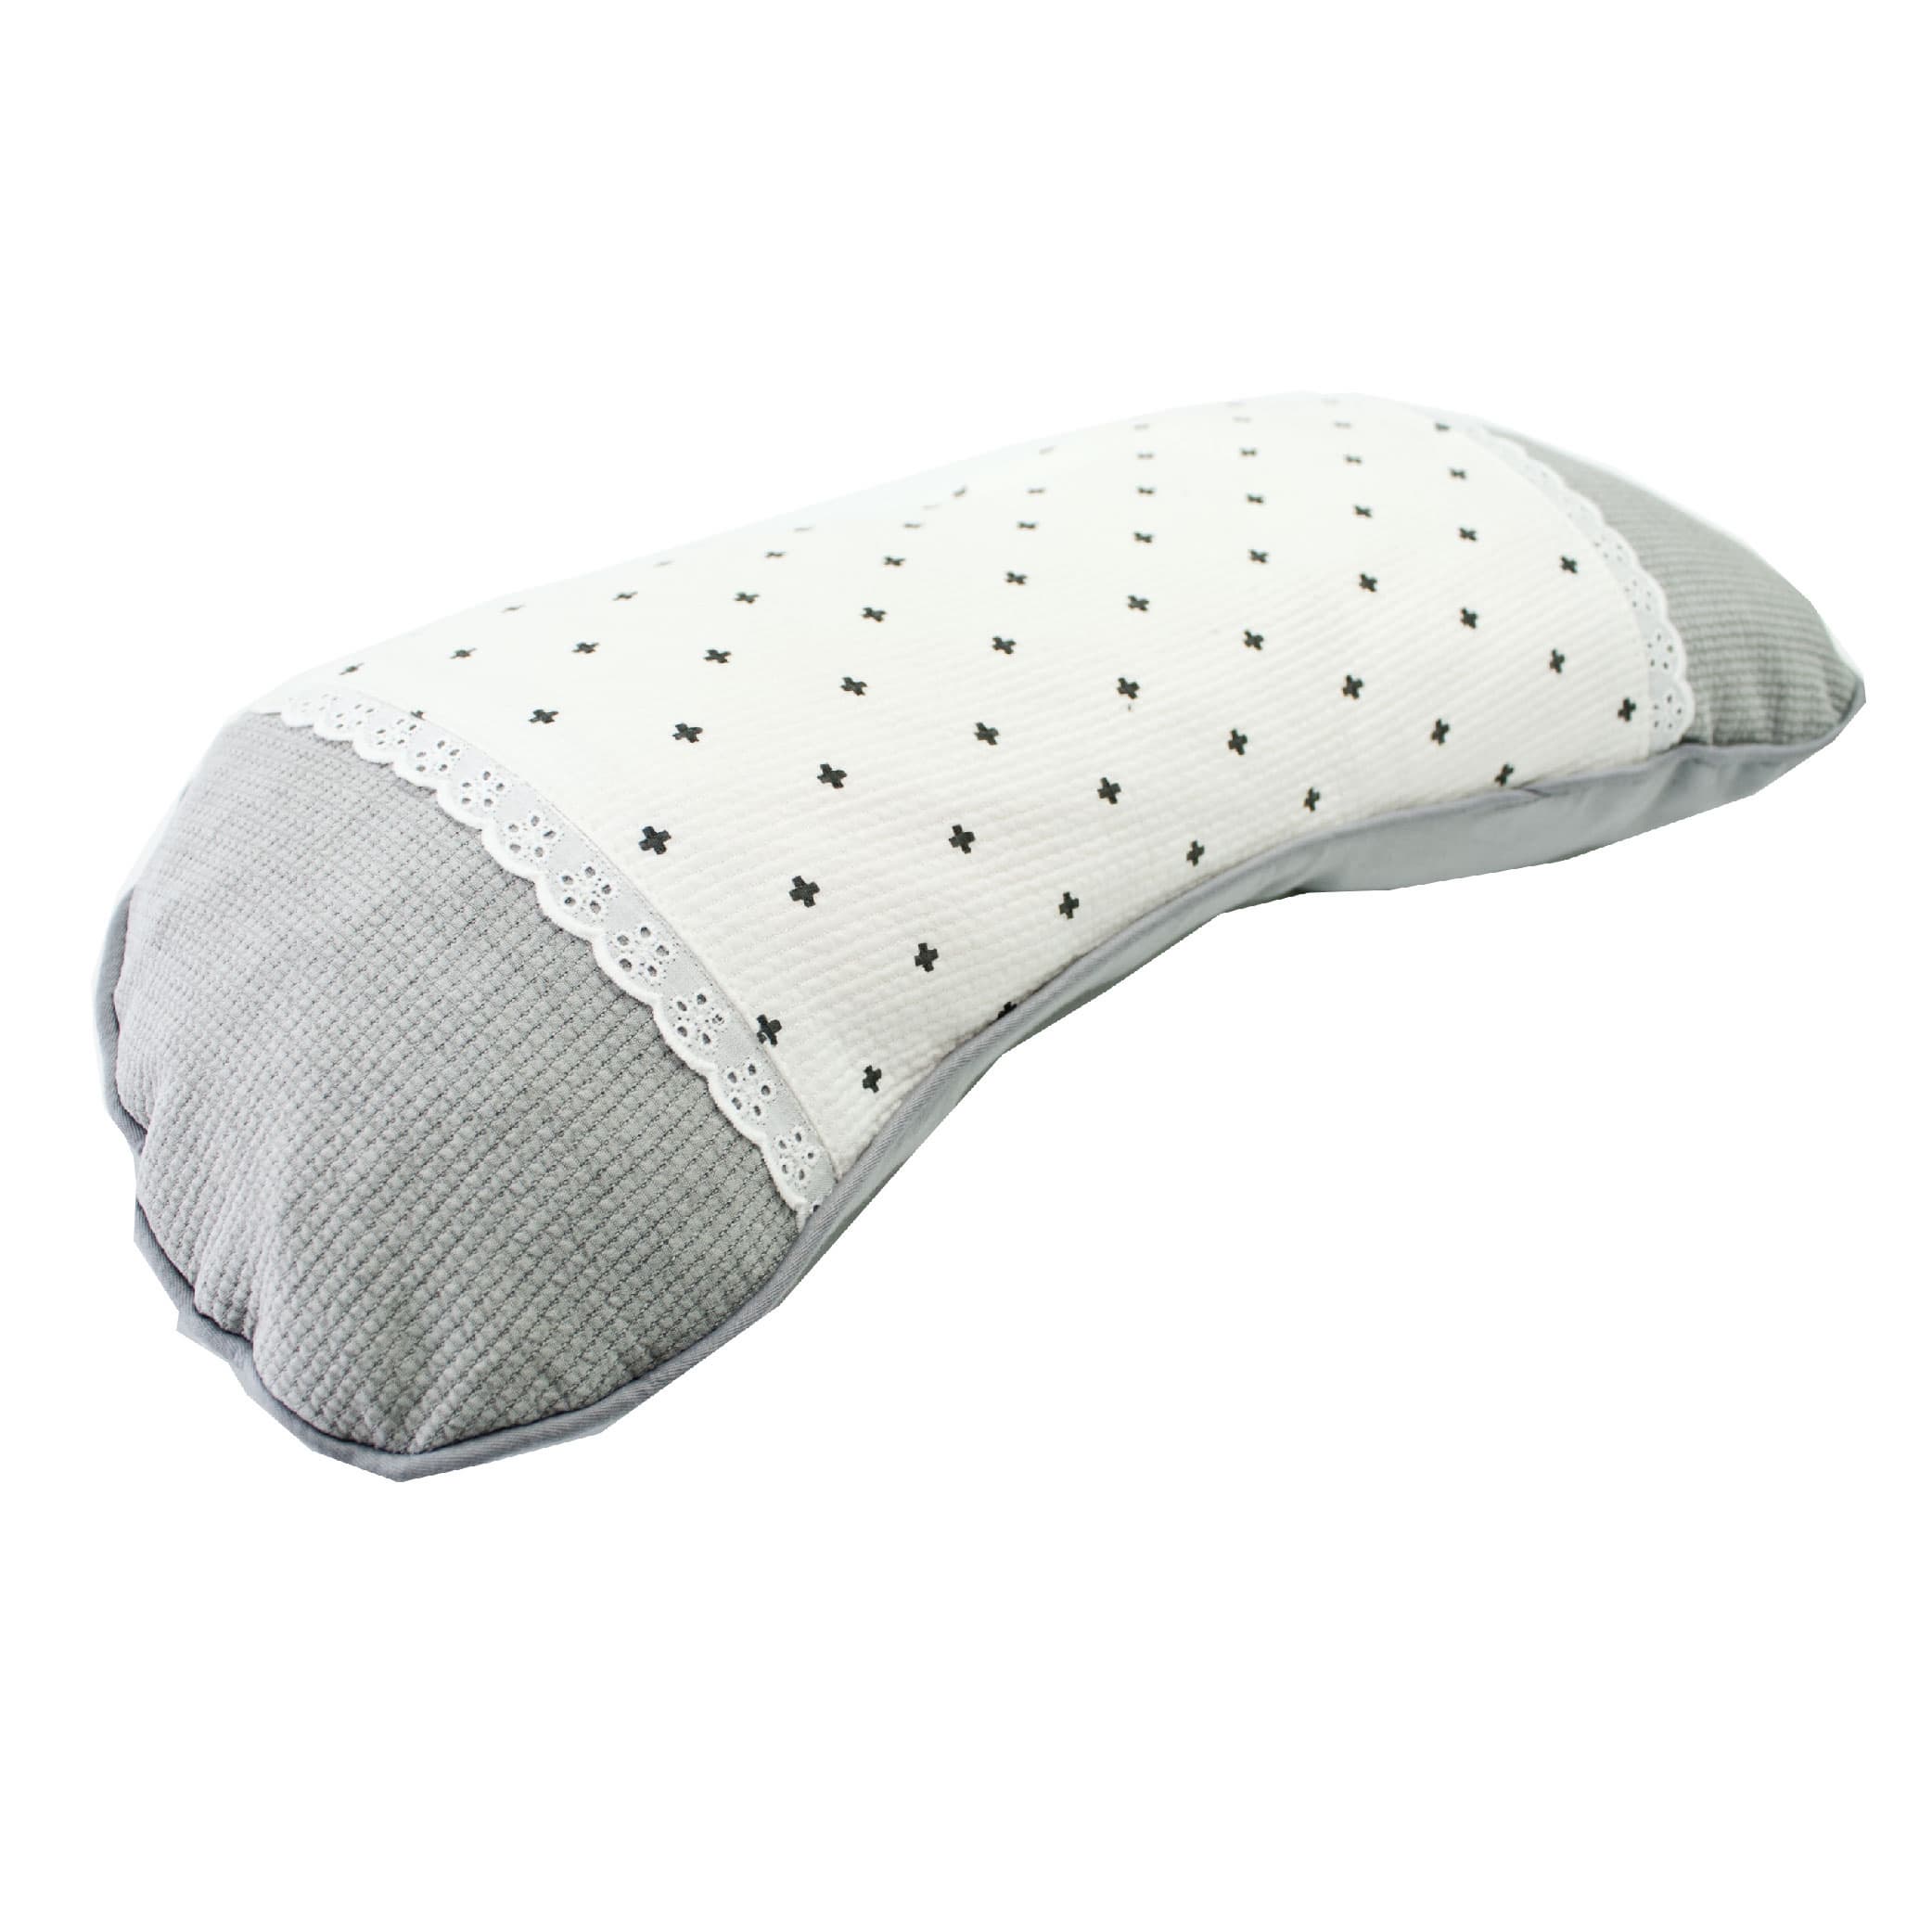 Latex Shredded Chip Pillow. Made from Shredded Organic Latex and